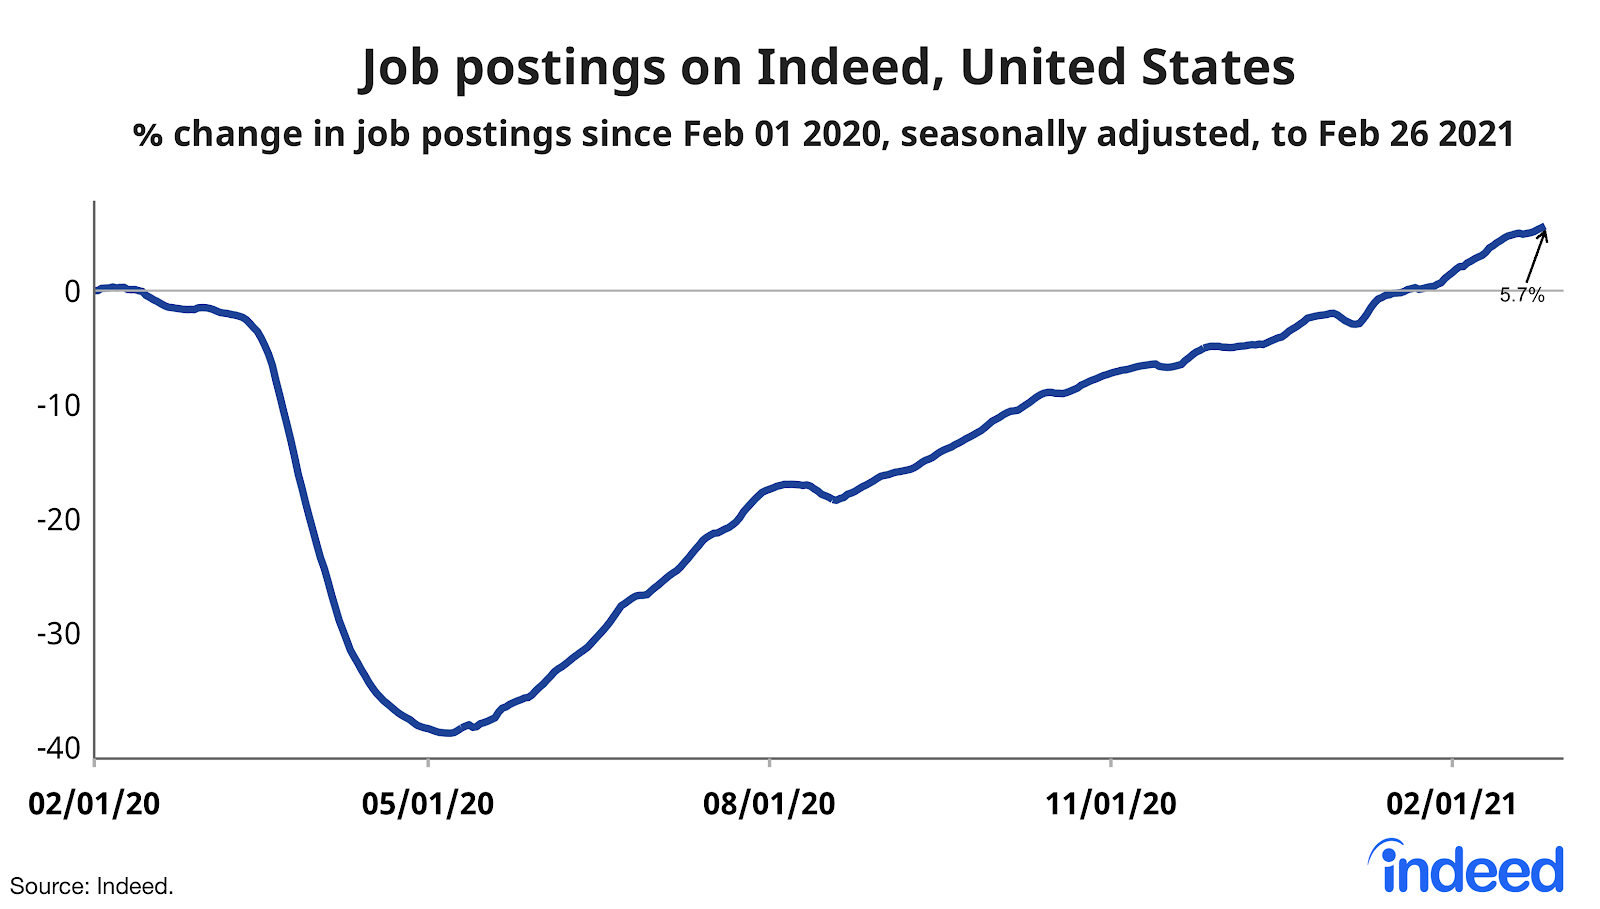 Line graph showing job postings on Indeed, United States